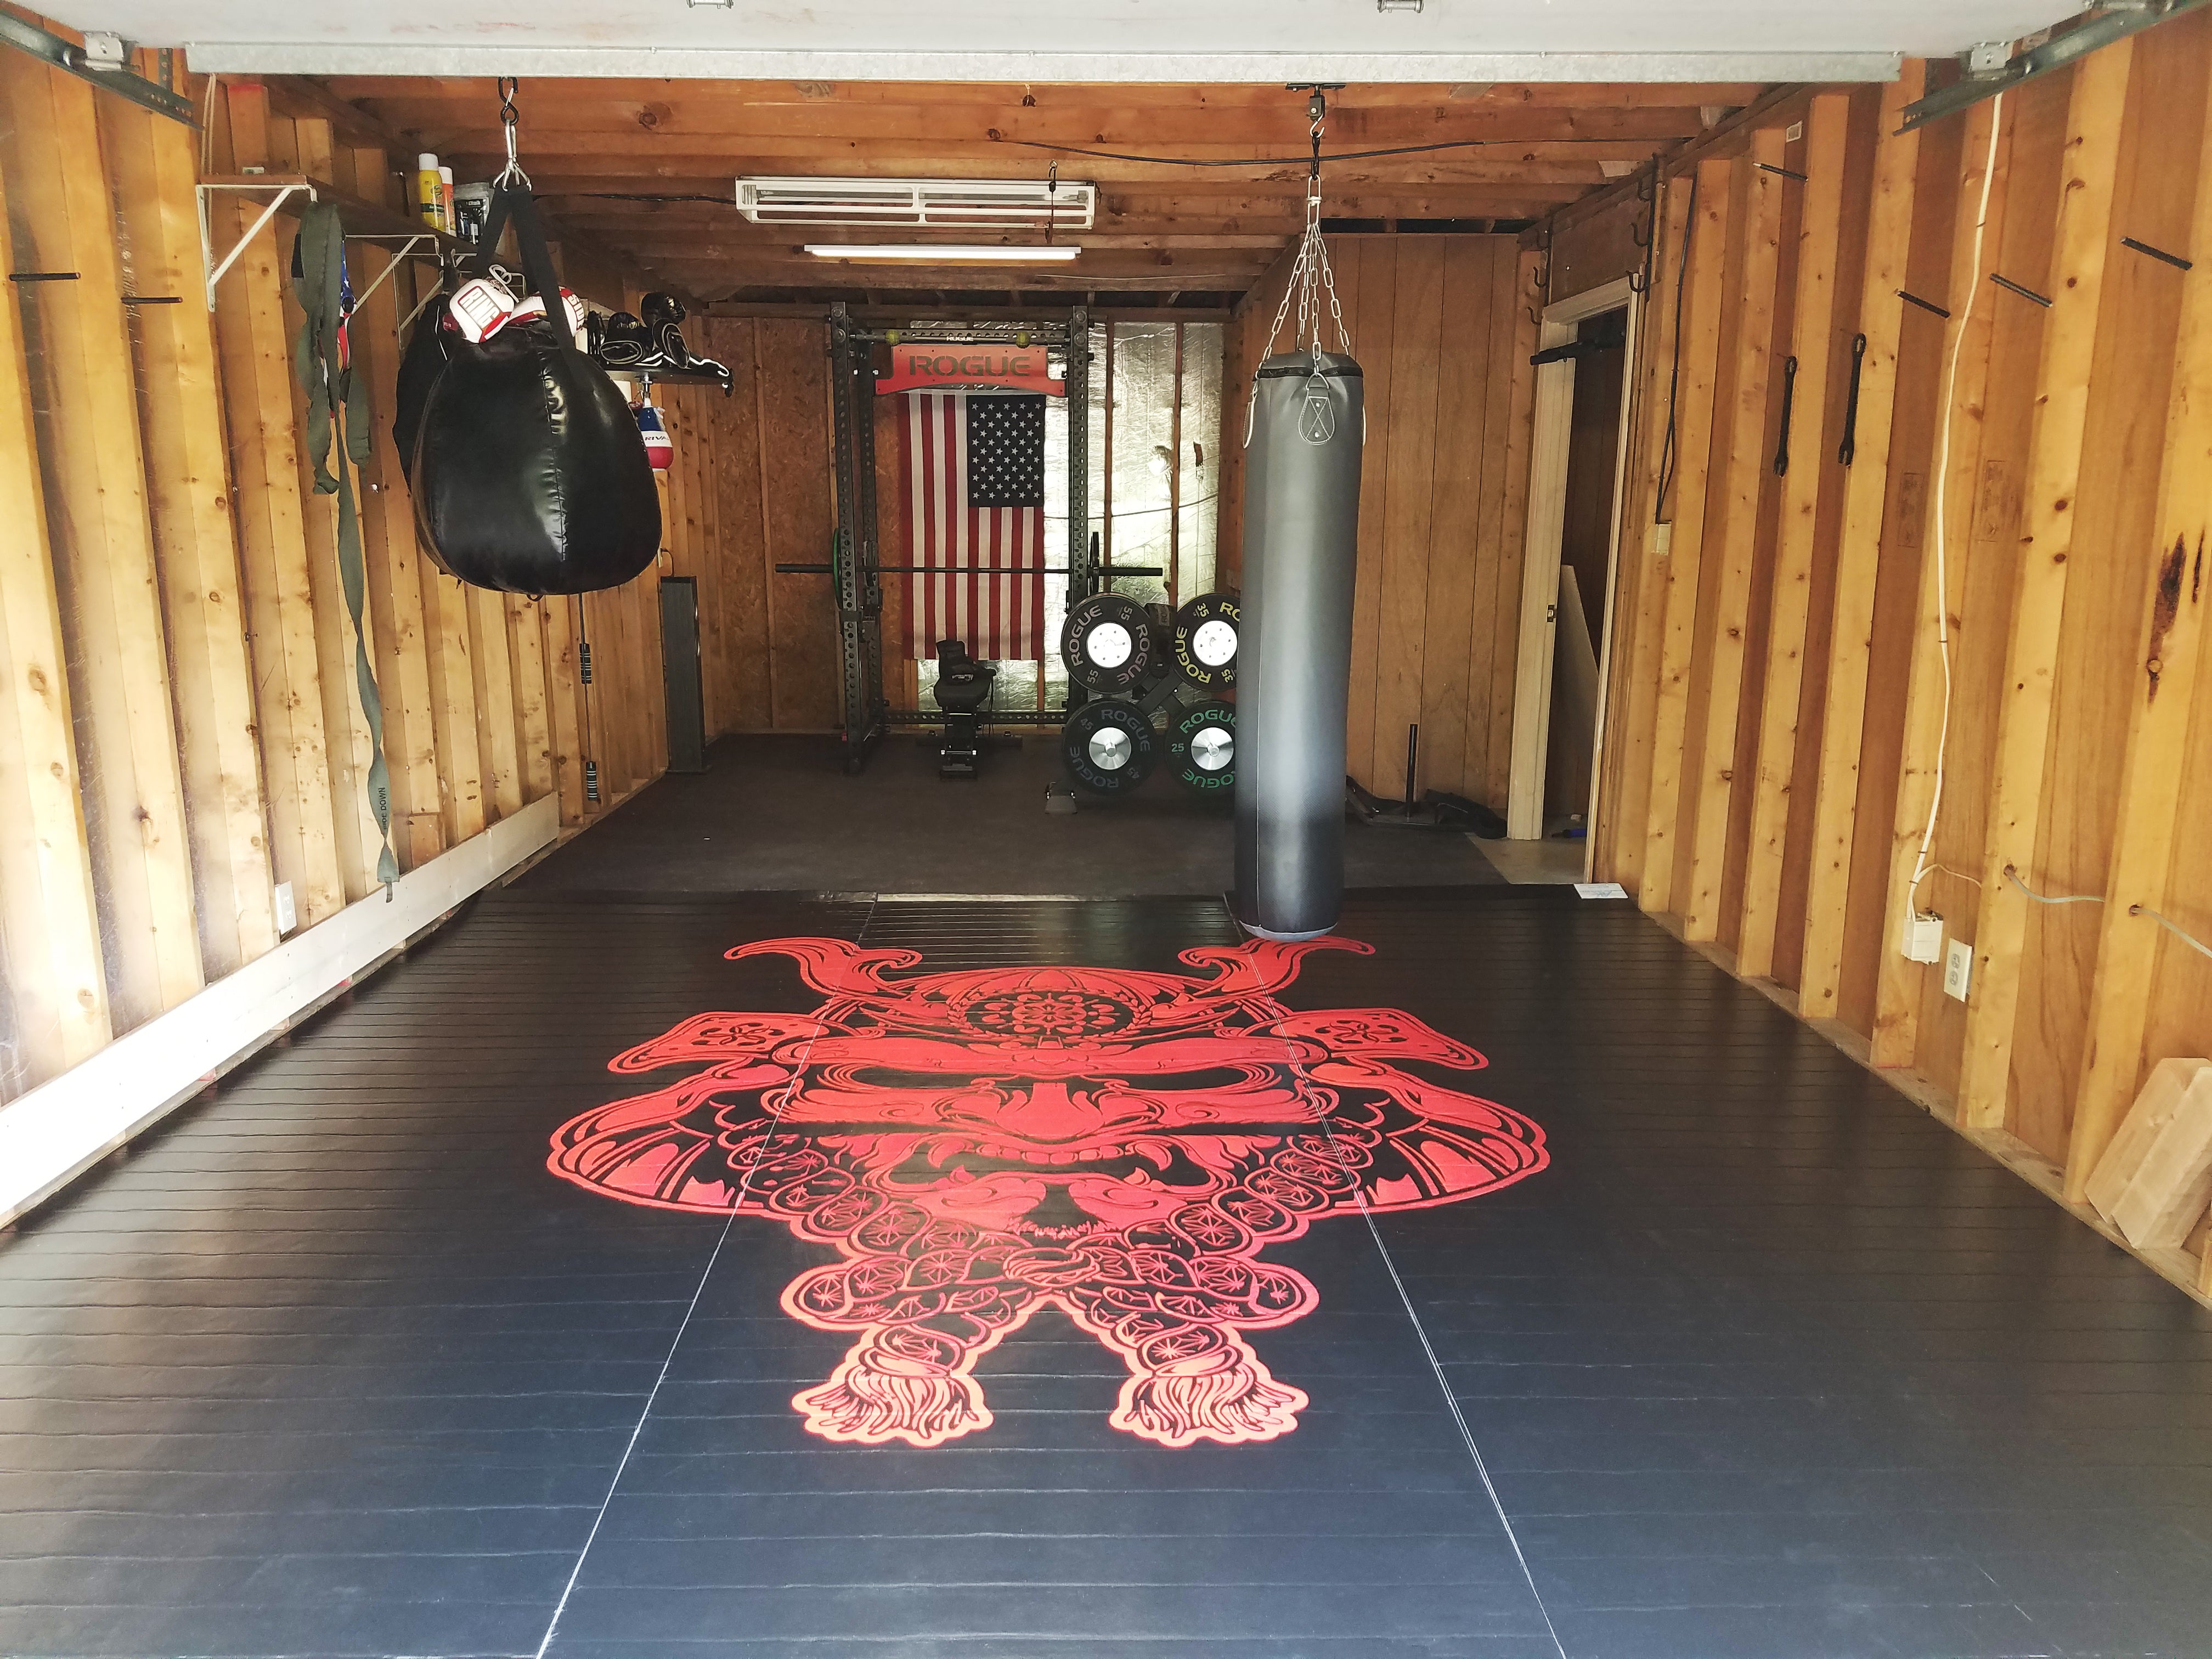 Garage Gym Featuring AK Wrestling Mat for Wrestling, Boxing, and grappling. 